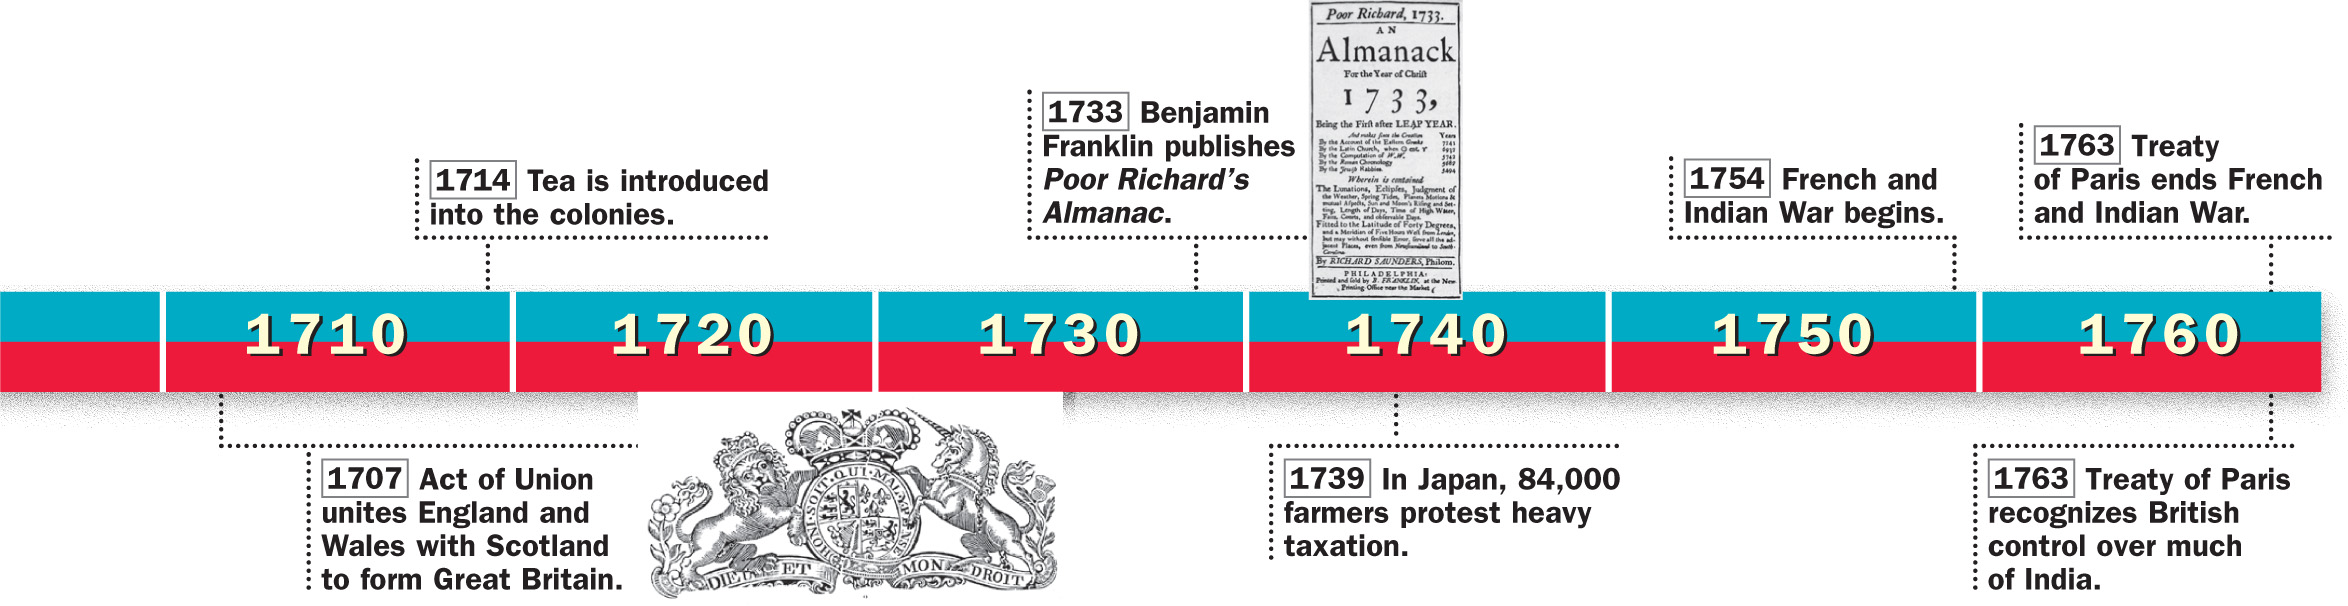 A timeline of historical events from 1650 to 1760 in both the Americas and the world